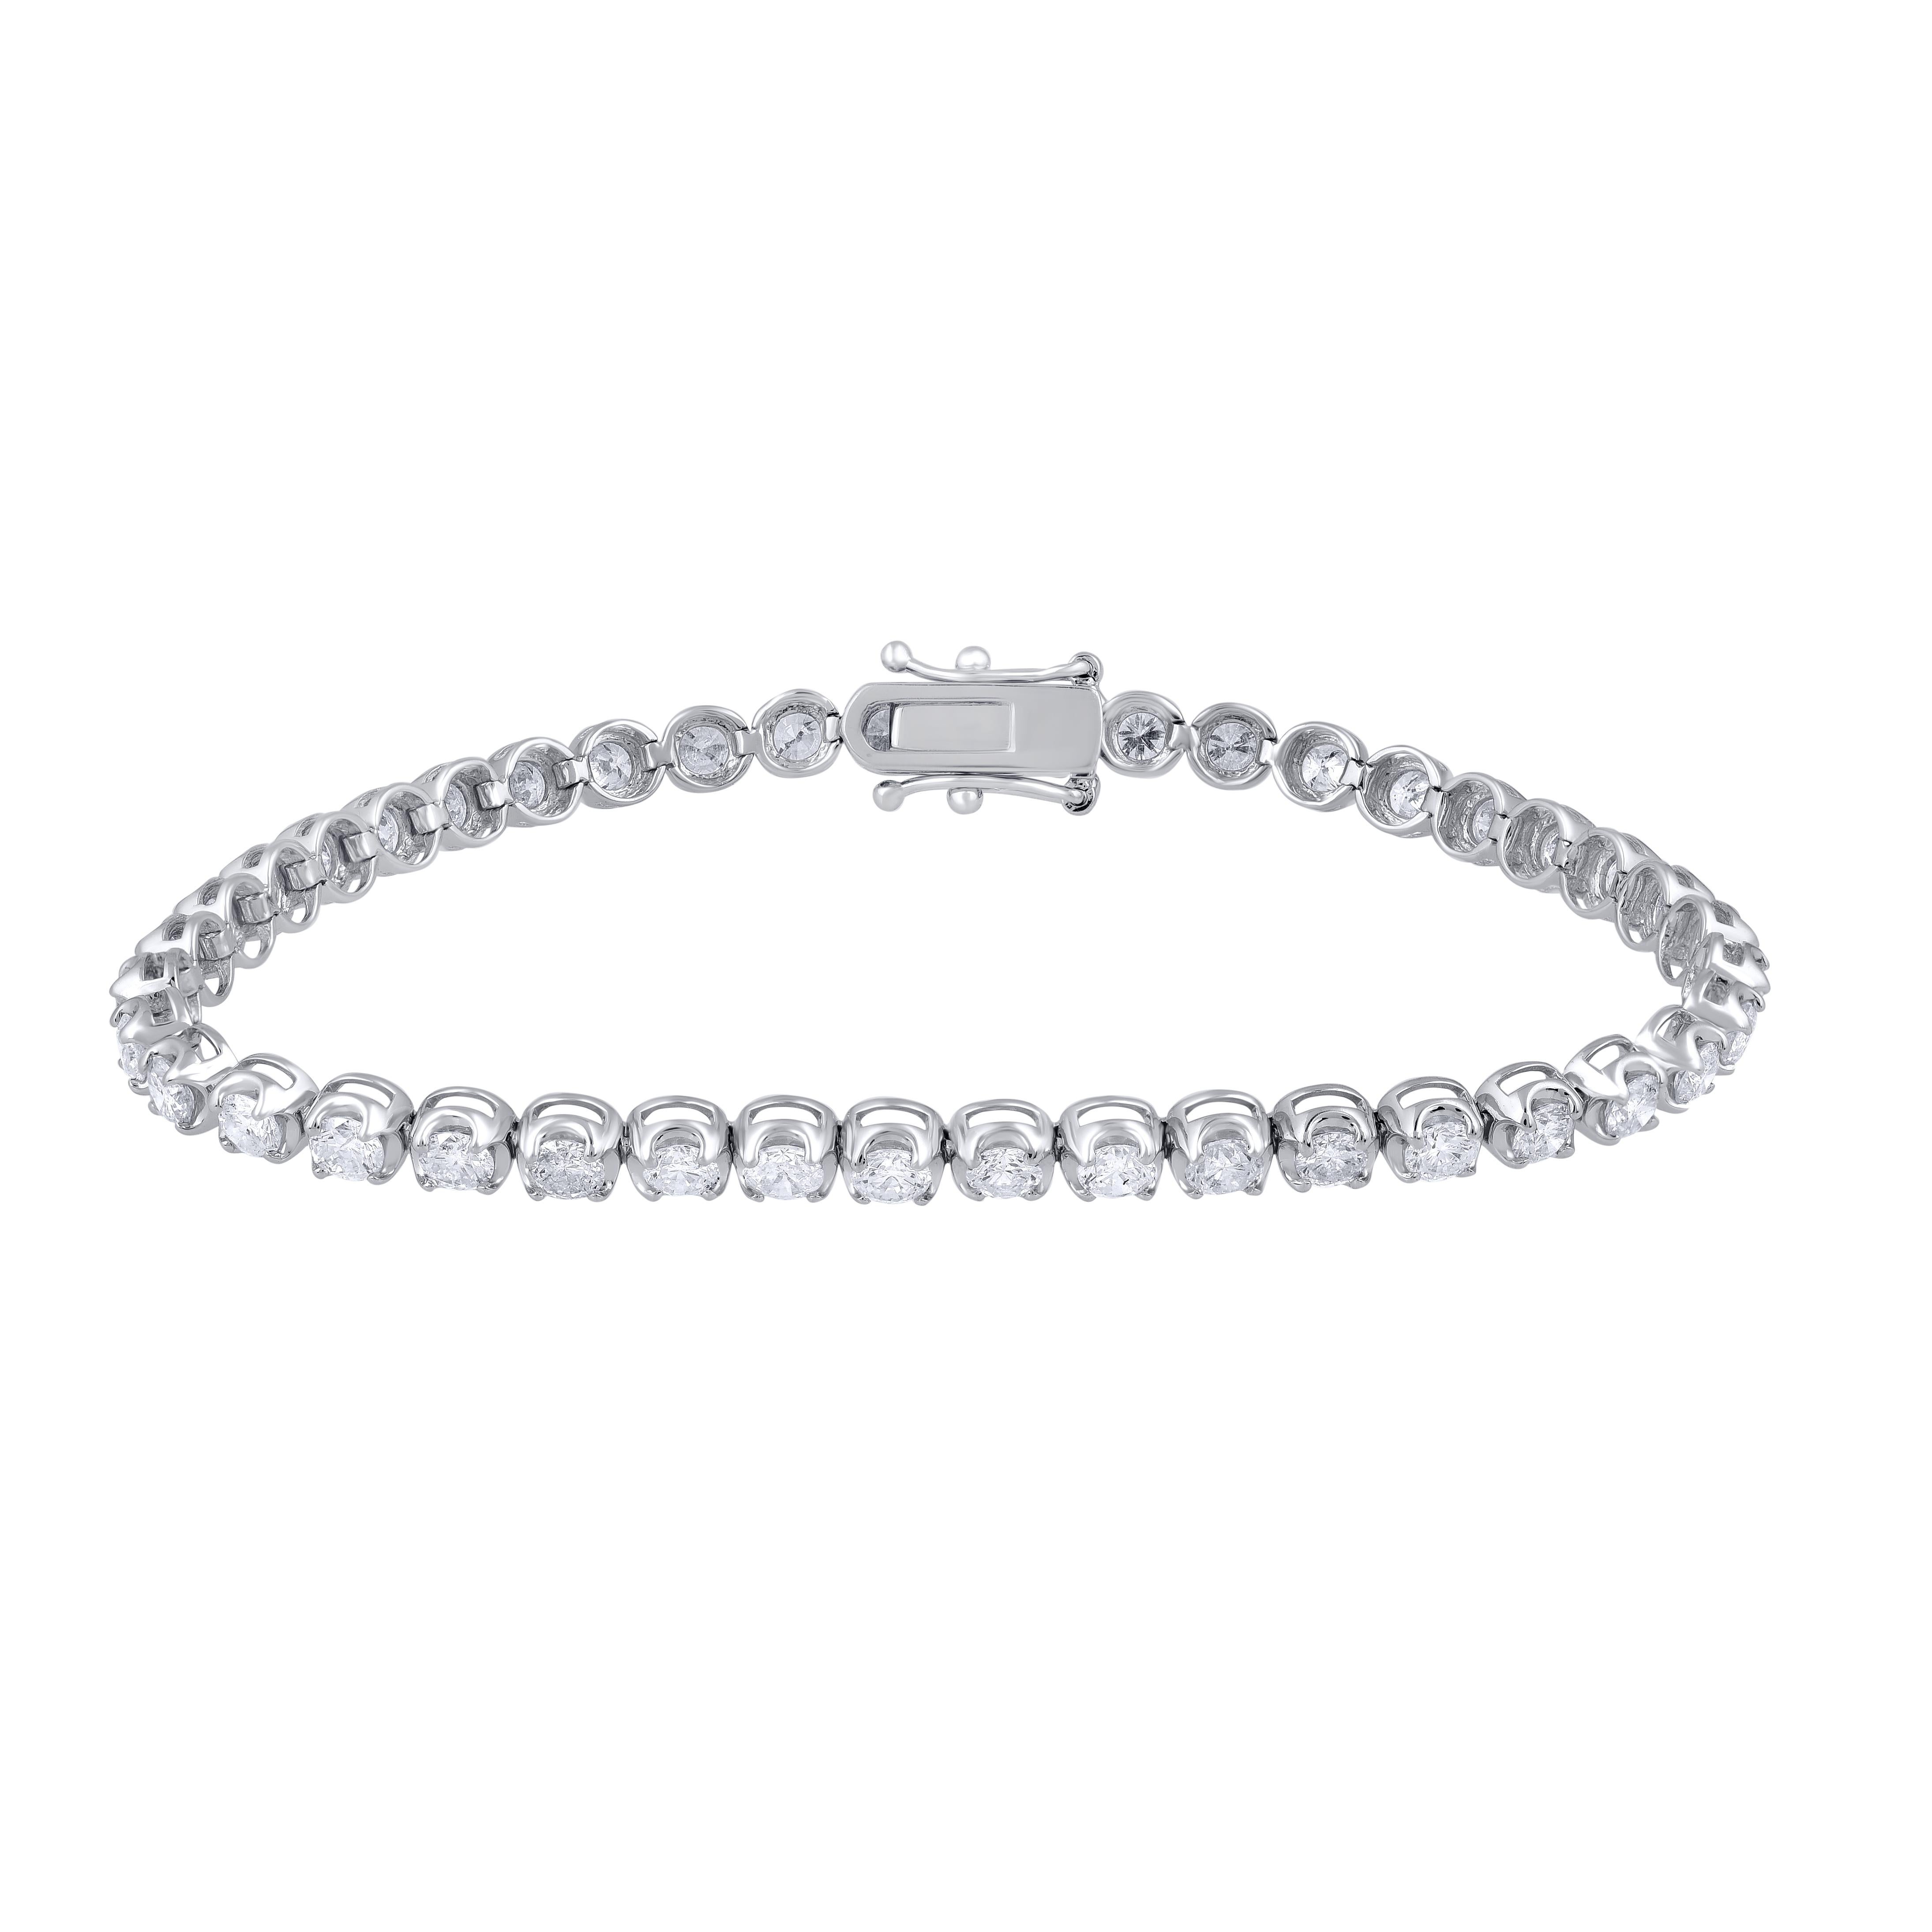 This stunning bracelet is perfect for everyday wear. It is studded with 41 diamonds in prong setting and crafted in 14 Kt  white gold. Diamond are graded G-H Color, I1- I2 Clarity. Bracelet secures firmly with a box clasp and it will be accompanied